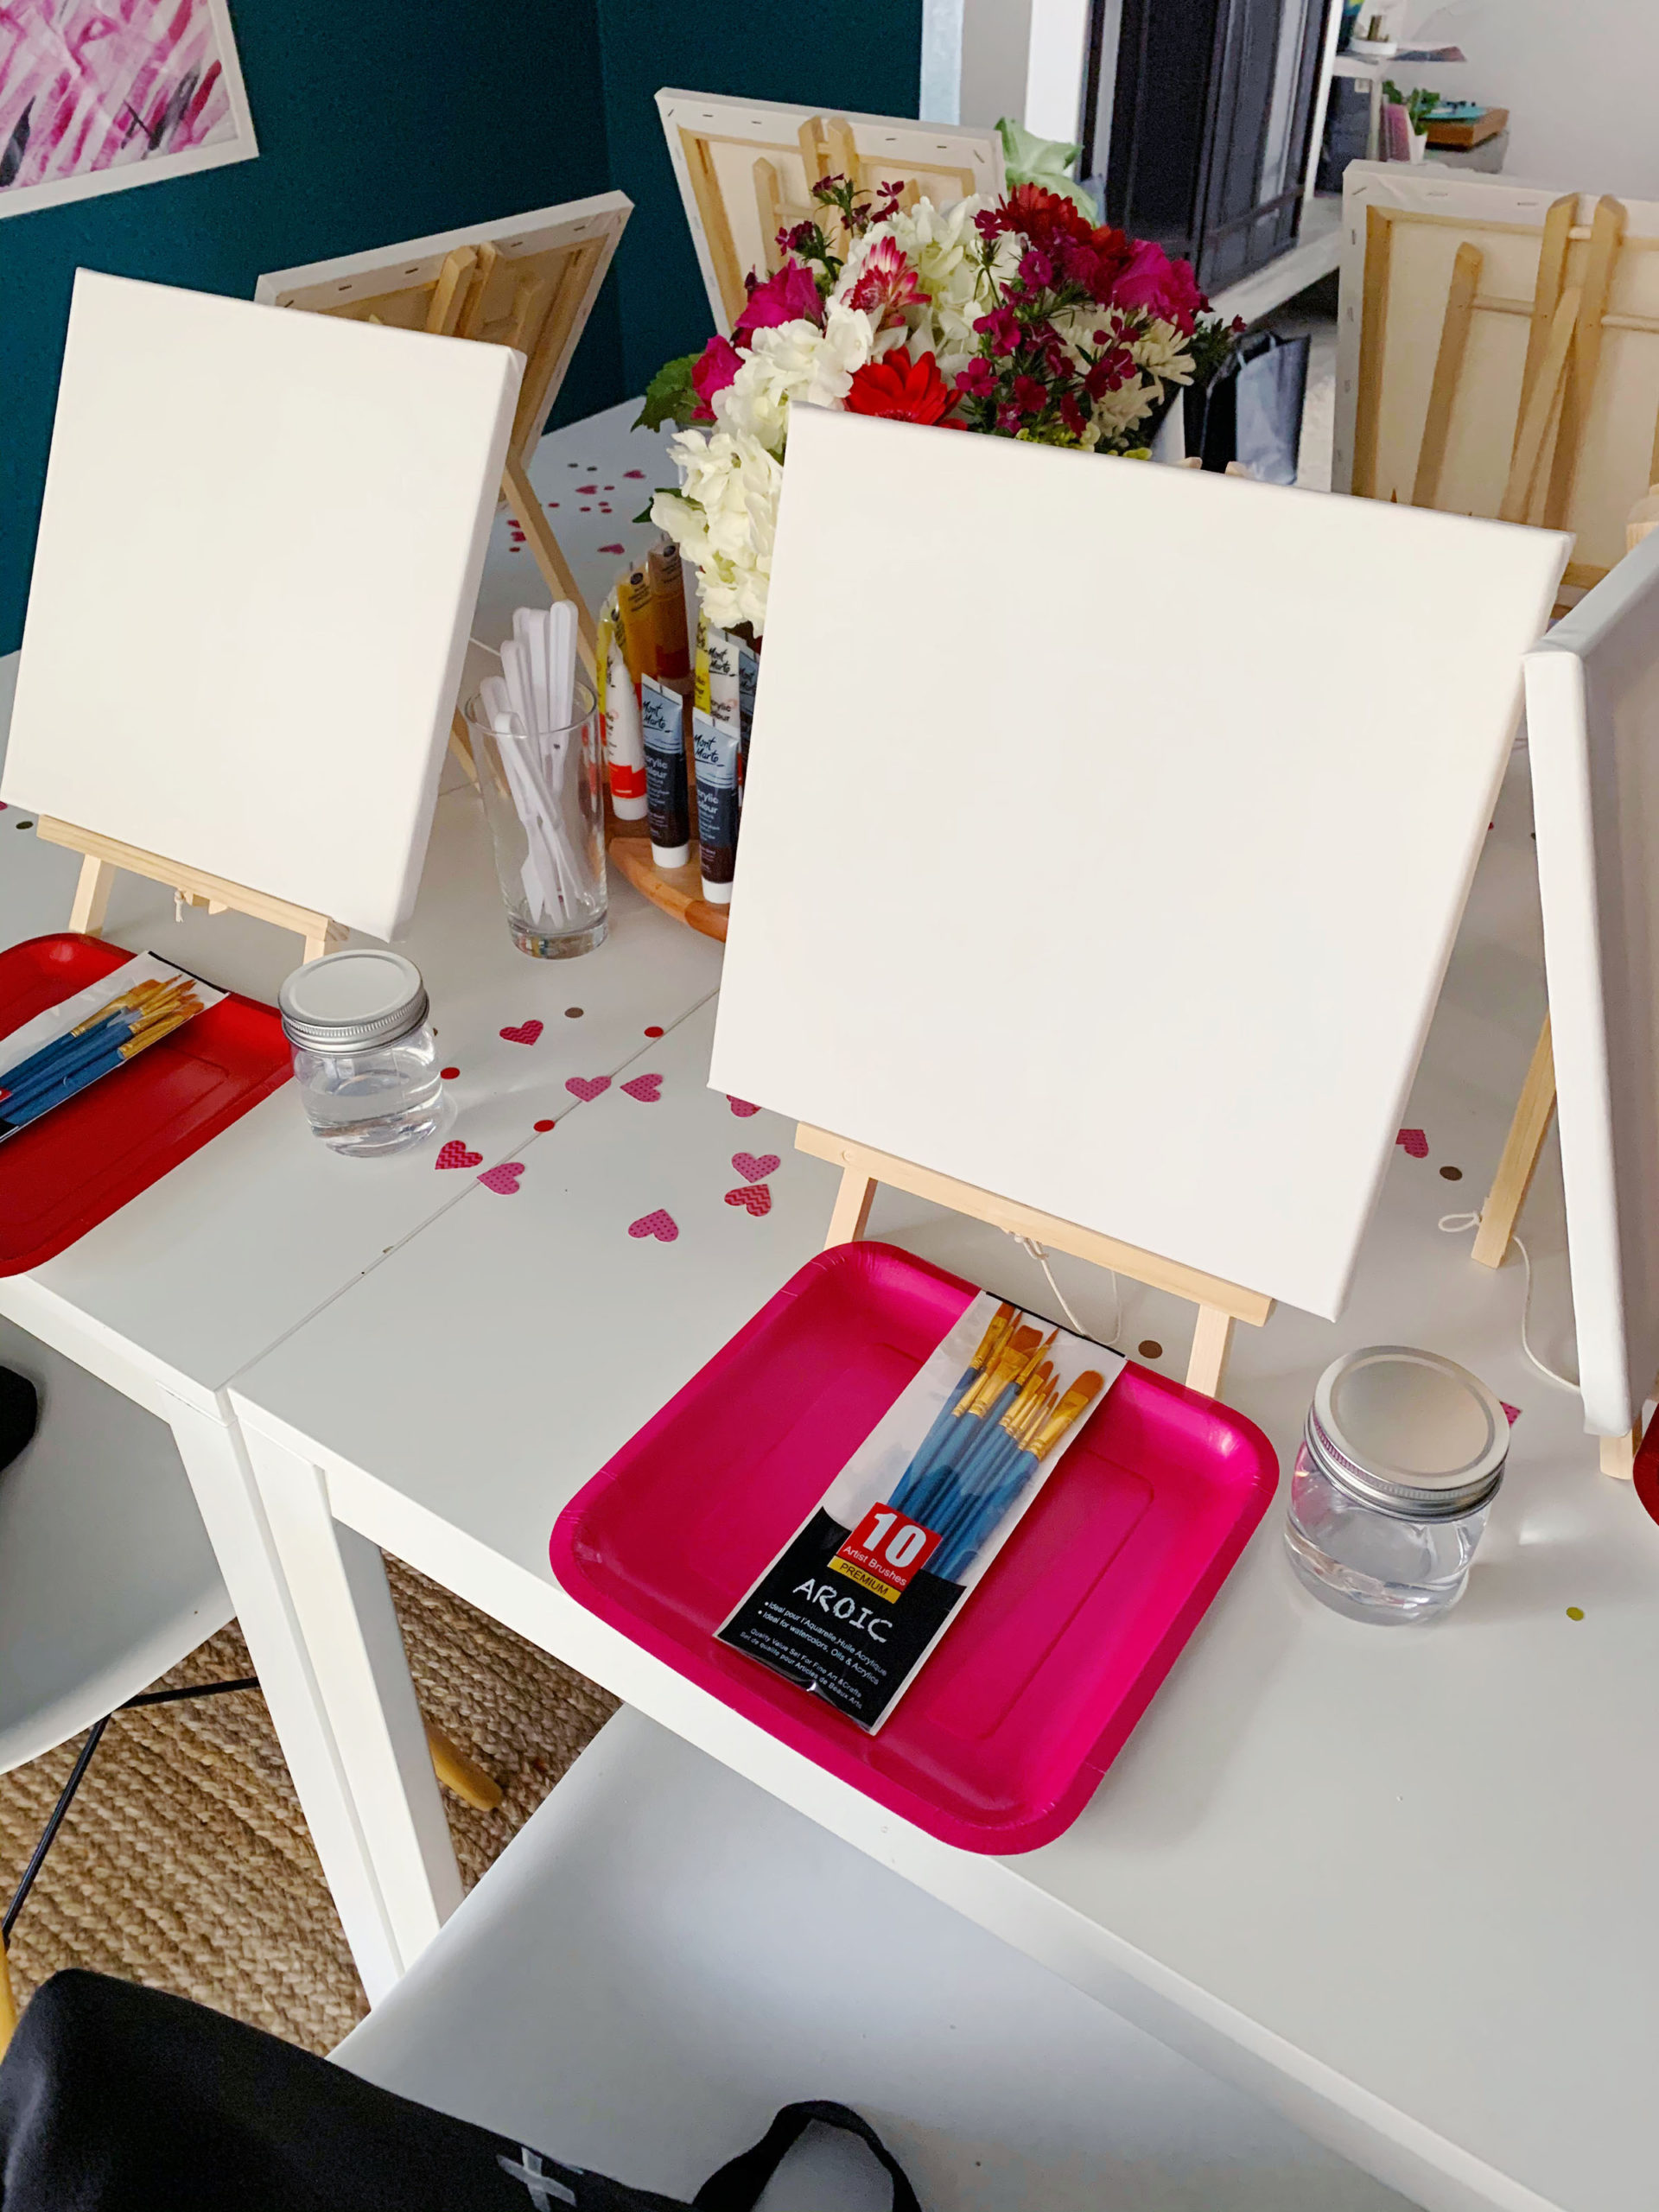 Paint and Sip Supplies for your DIY Paint party, with Instructions